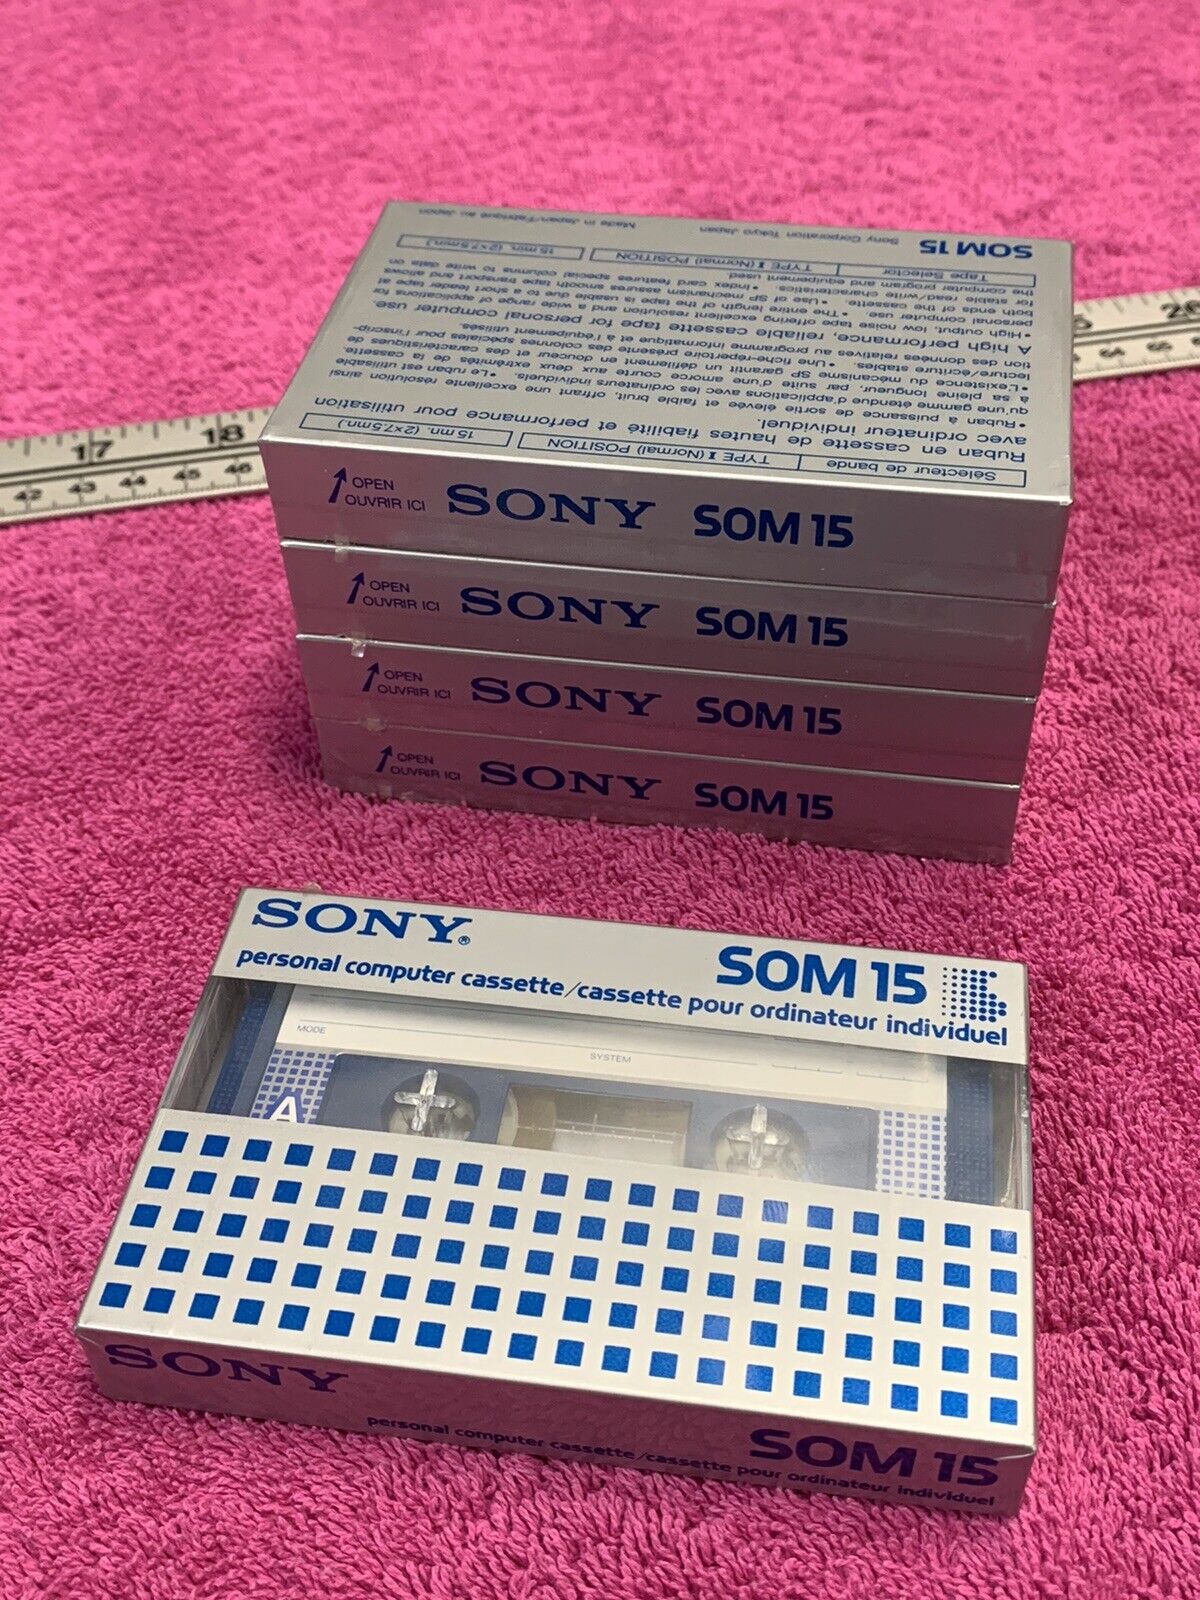 5 LOT Vintage ALL SEALED Sony Personal Computer Cassette SOM-15 Super Scarce NOS